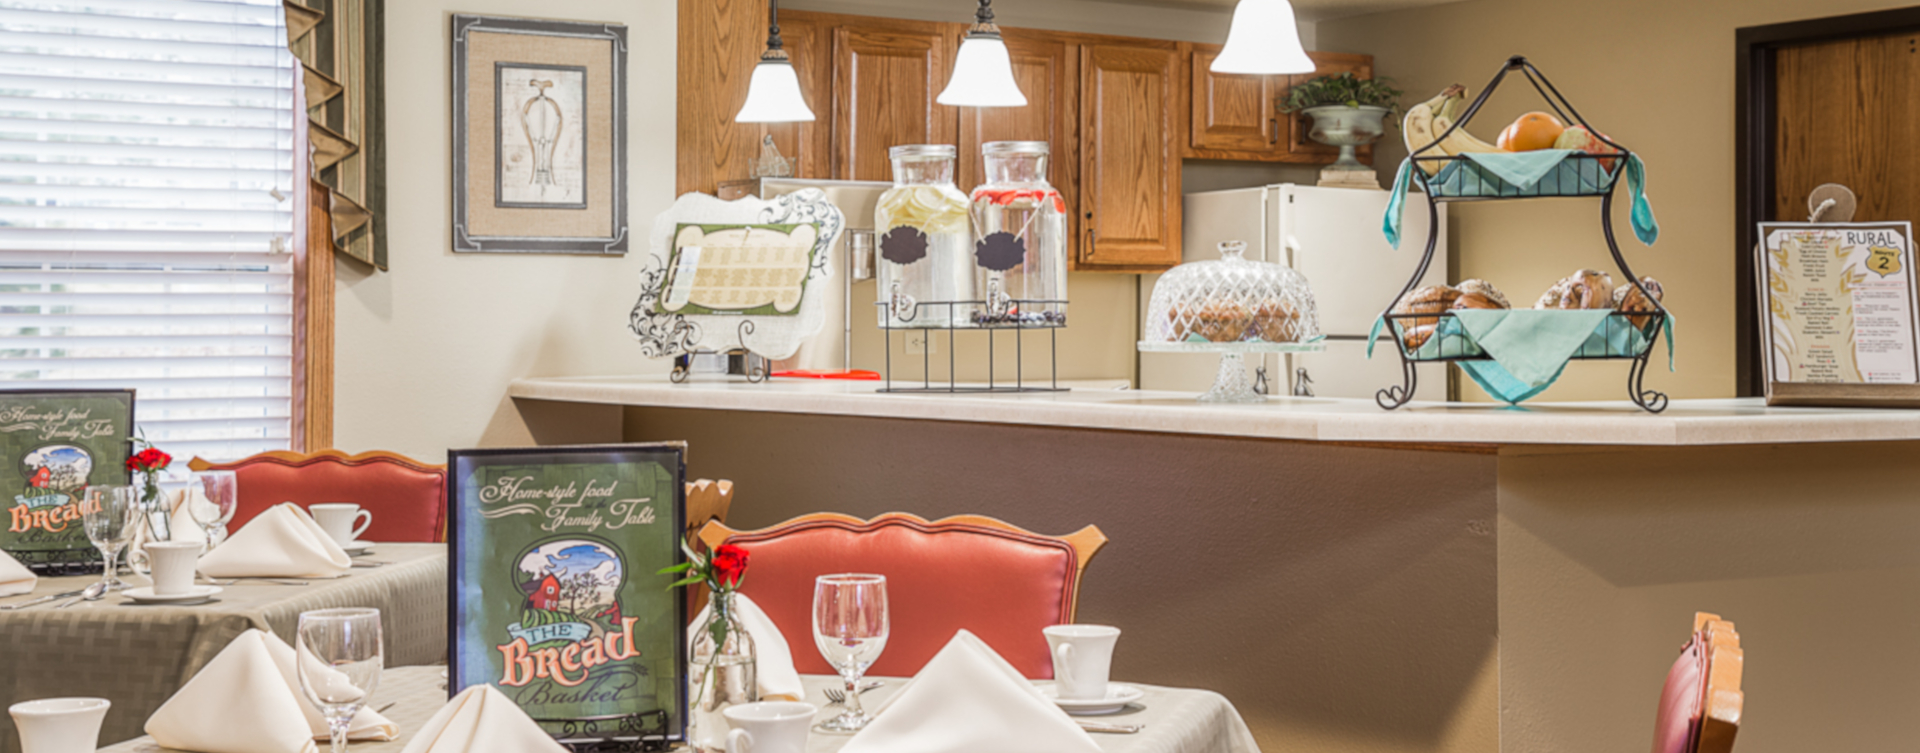 We’re serving up snacks, beverages and service around the clock in the bistro at Bickford of Urbandale